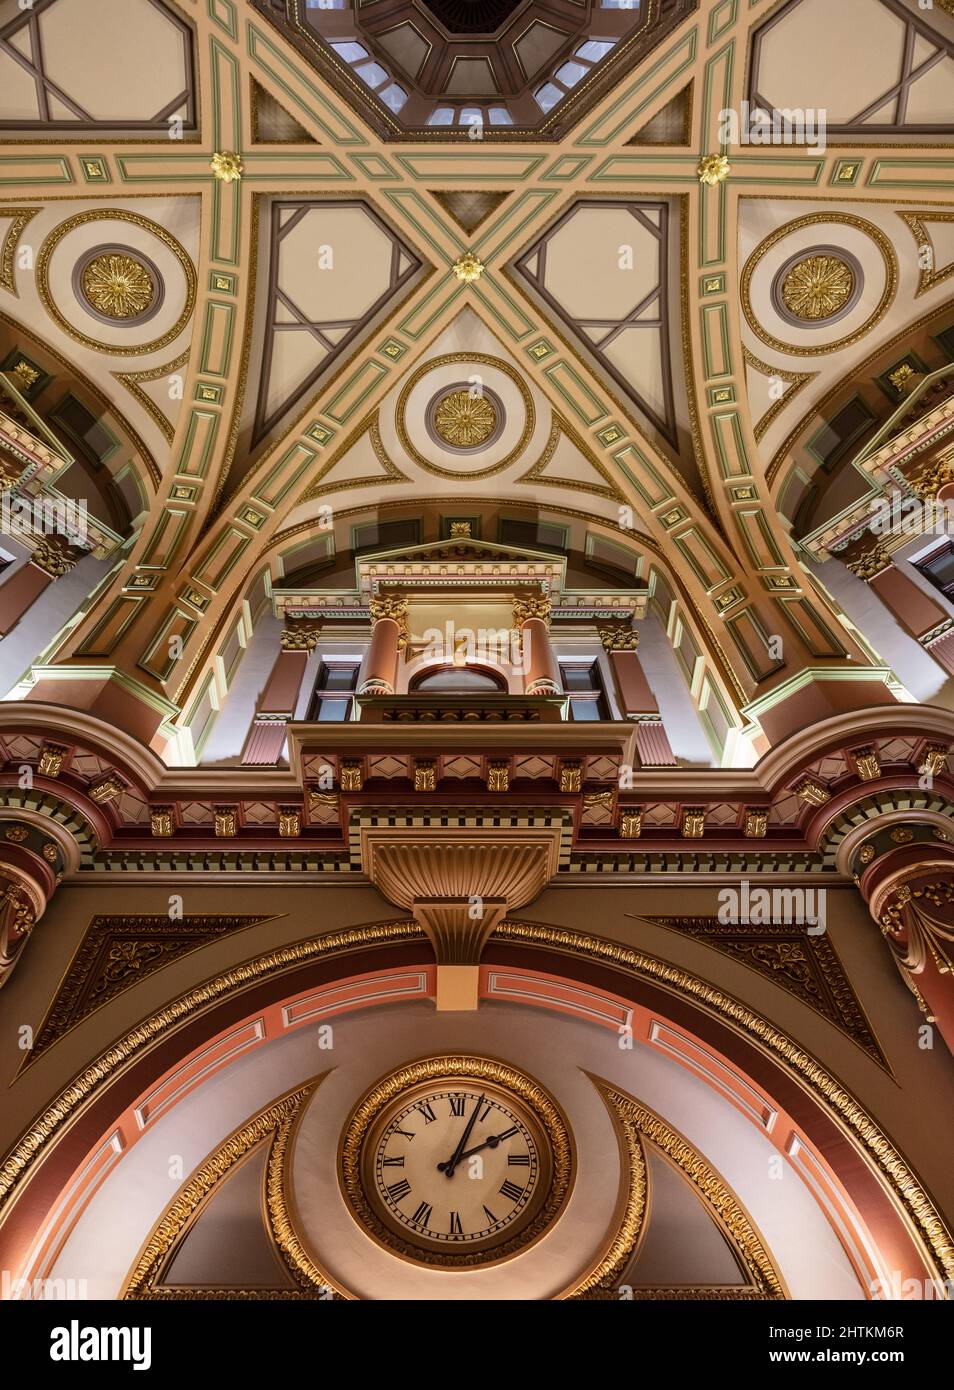 Ornate ceiling of the Banking Chamber of the Head Office of the Commercial Bank of Australia Ltd in Melbourne. 333 Collins Street. Stock Photo